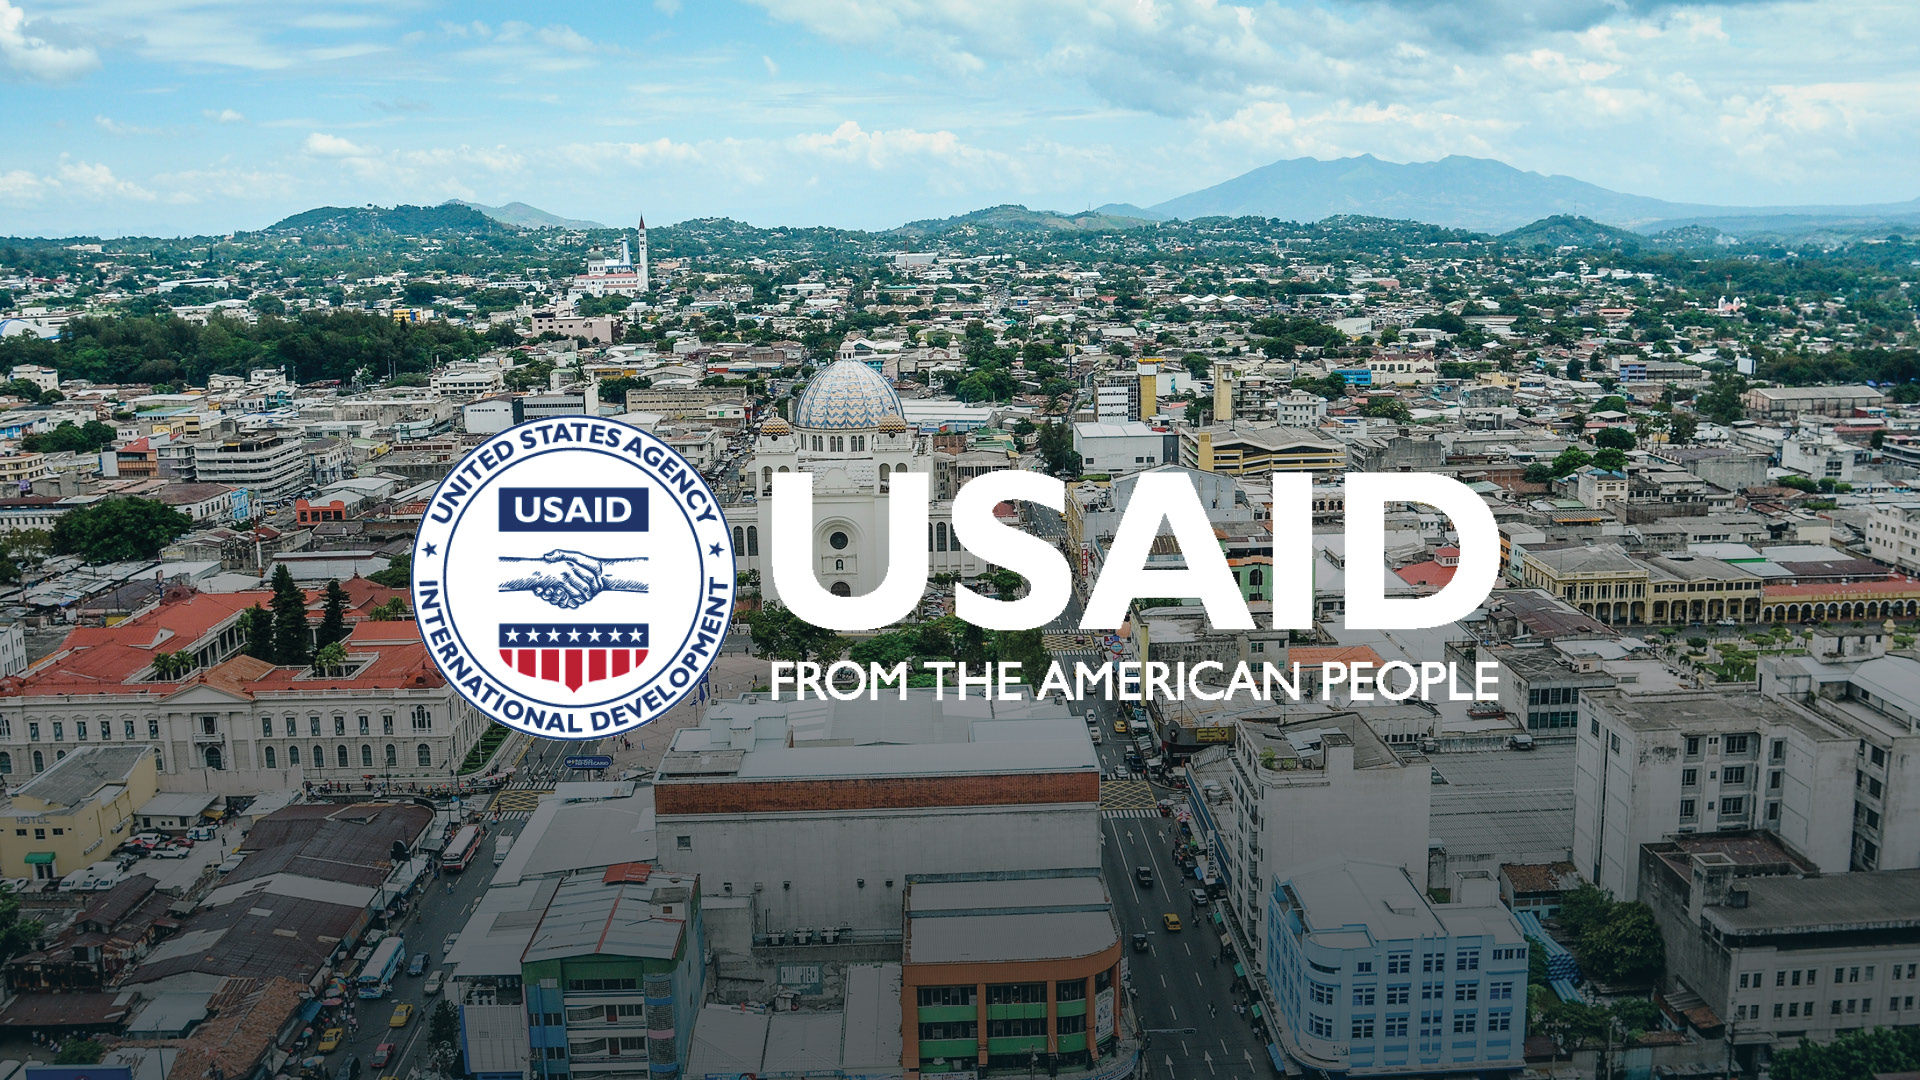 An aerial view of the city of San Salvador with USAID's logo laid over the top.